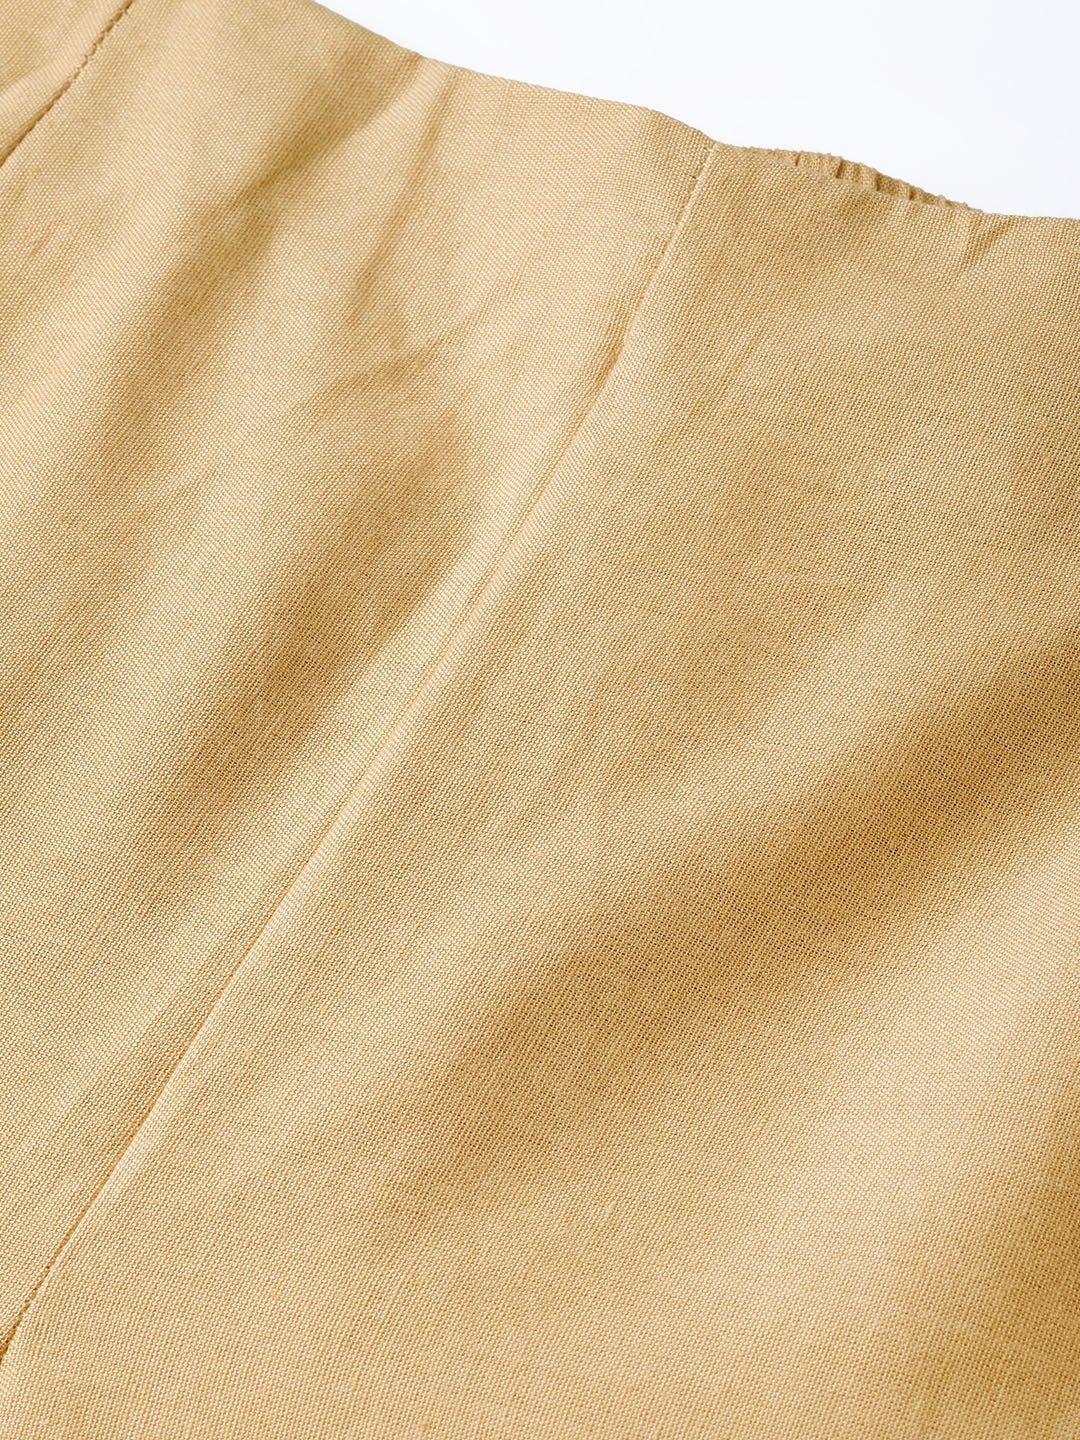 Princi Fashion Regular Fit Women Gold, Gold Trousers - Buy Princi Fashion  Regular Fit Women Gold, Gold Trousers Online at Best Prices in India |  Flipkart.com